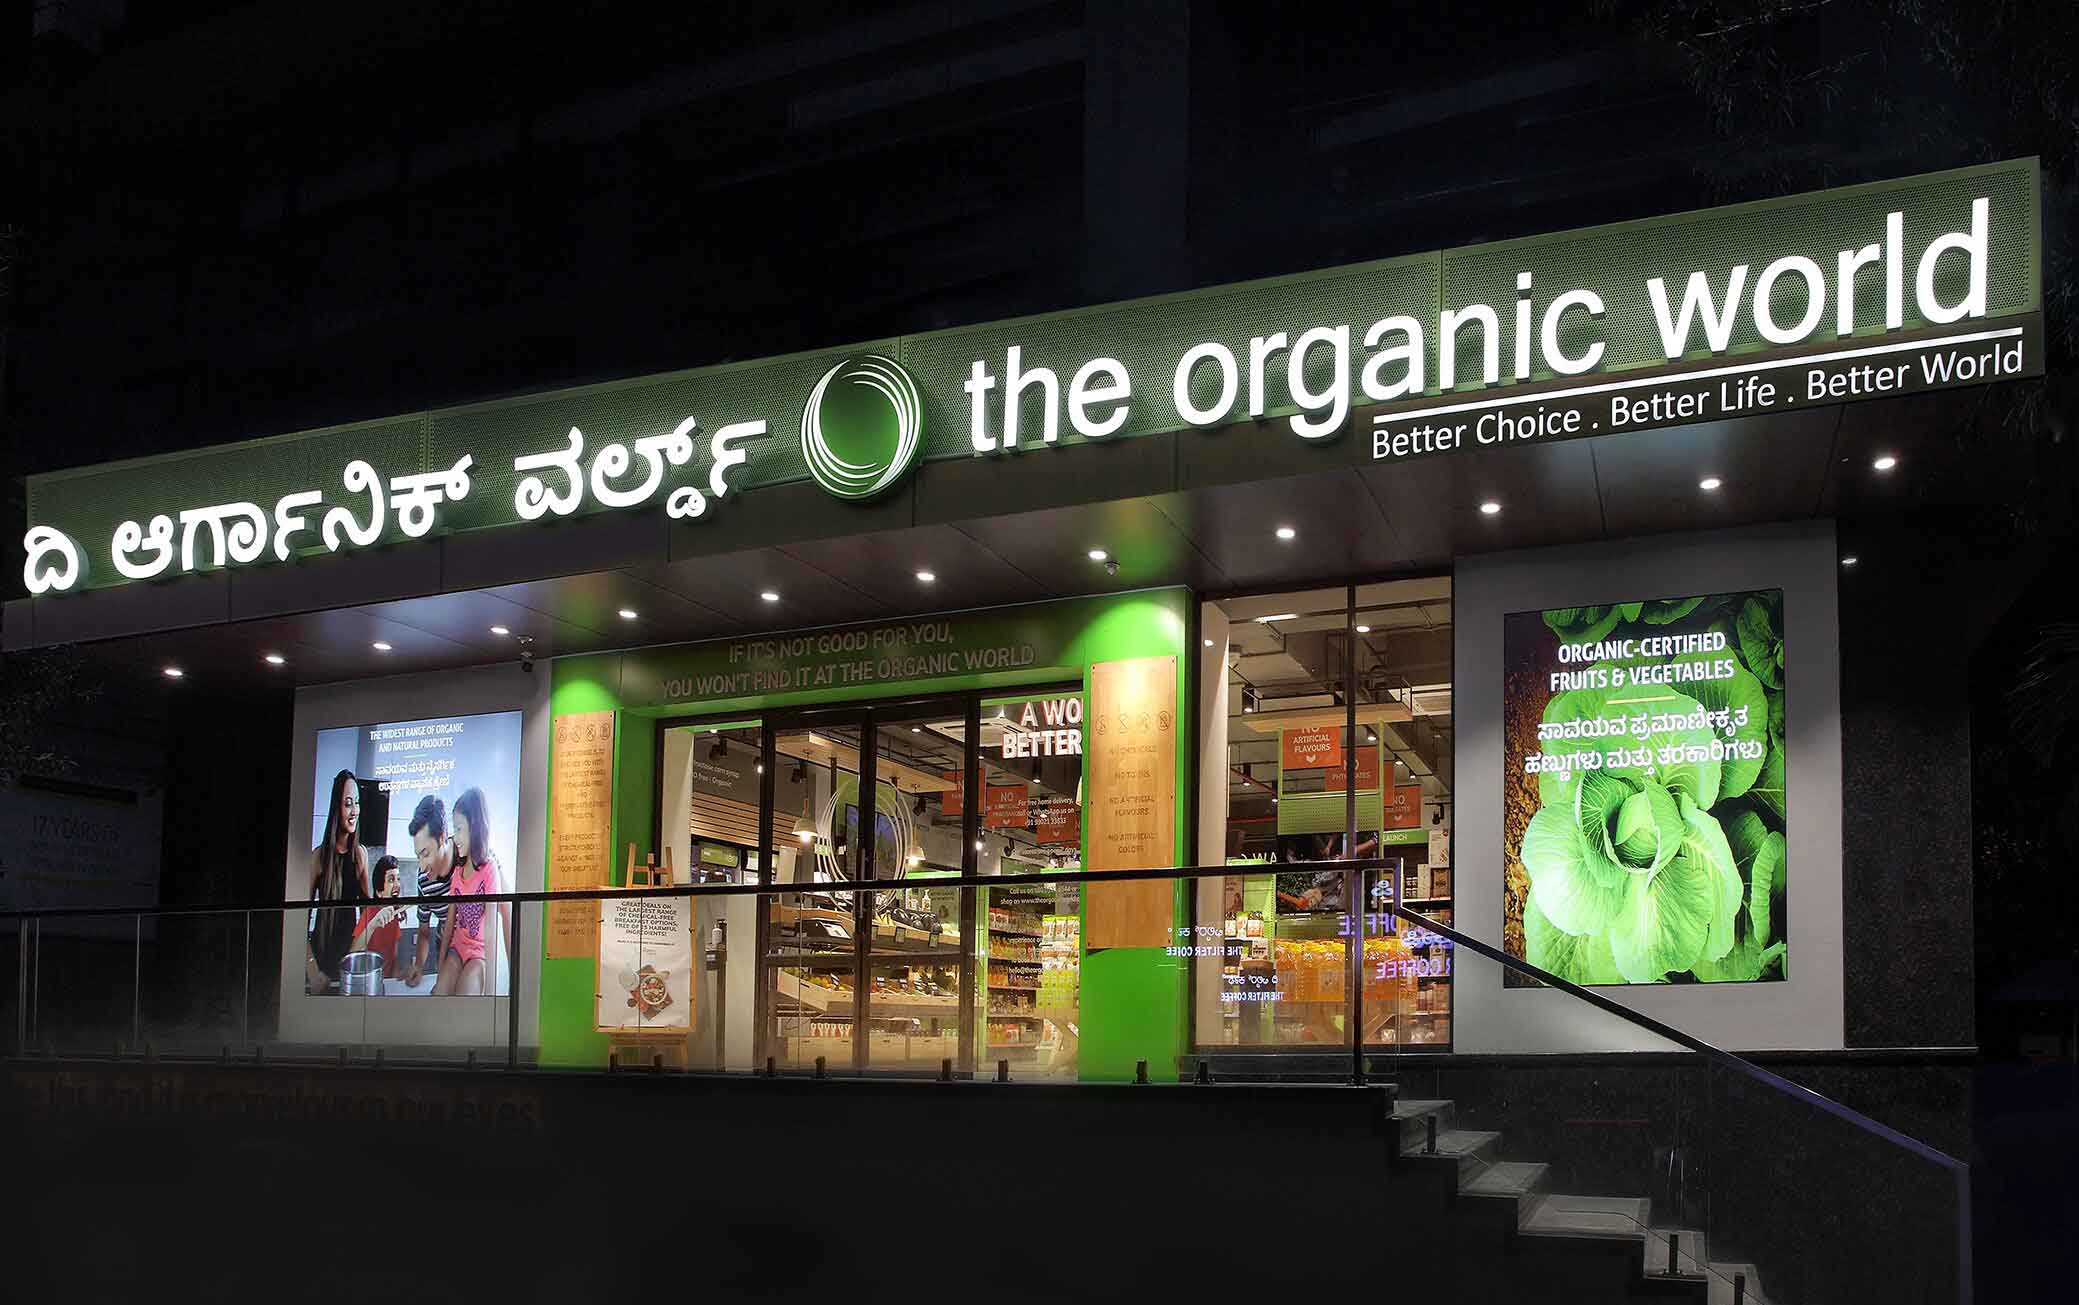 The organic world store front look